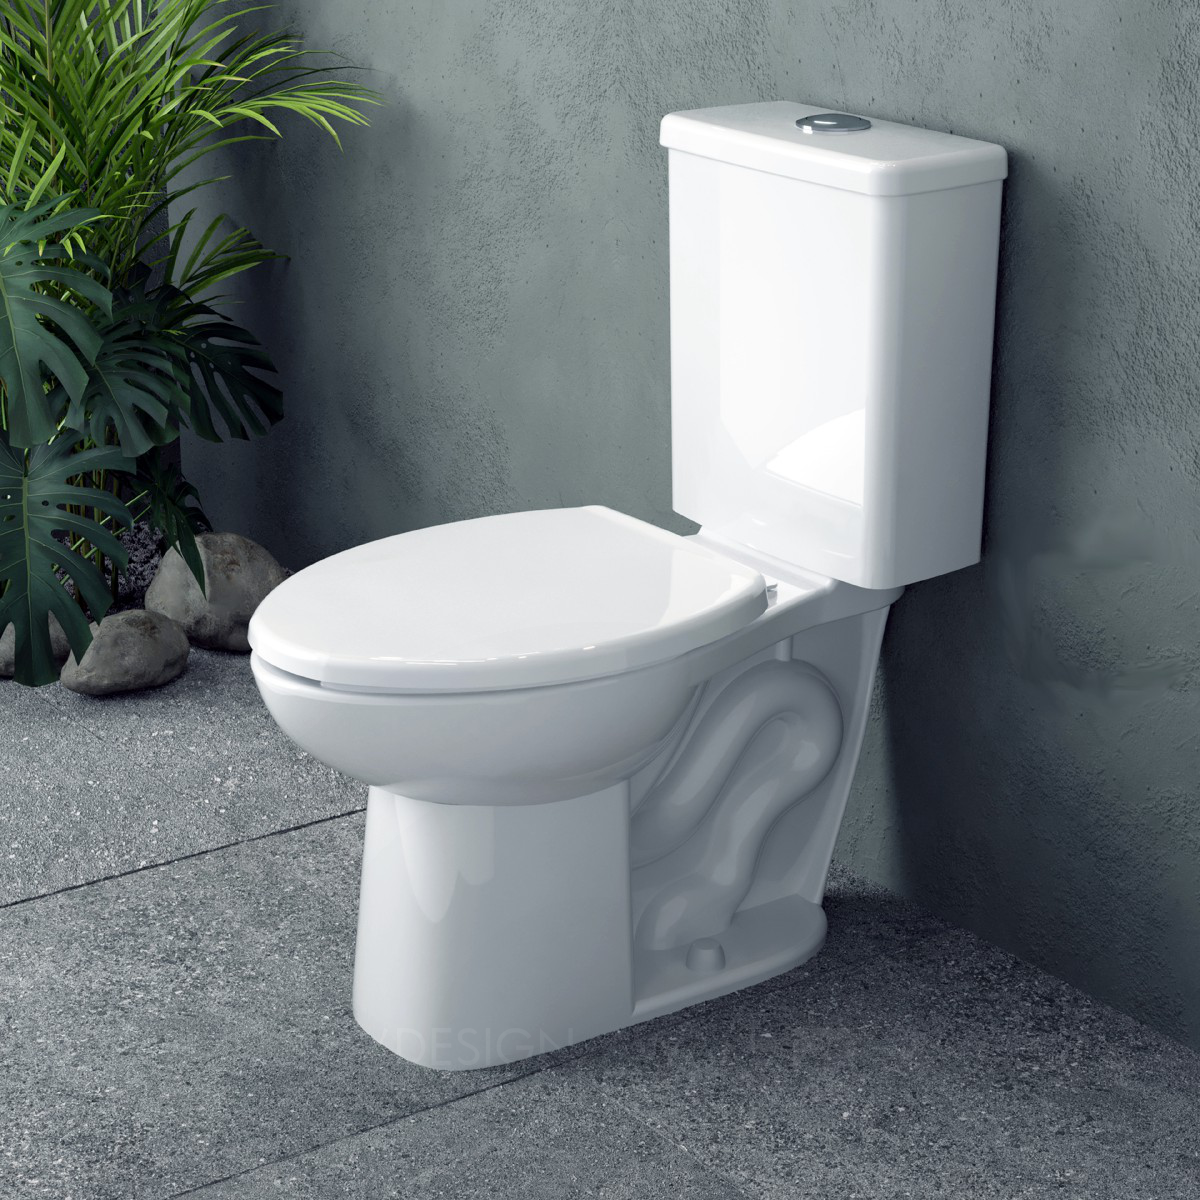 Sustenta Bathroom Toilet by Manuel Alonso Martinez Rivera Silver Sustainable Products, Projects and Green Design Award Winner 2024 